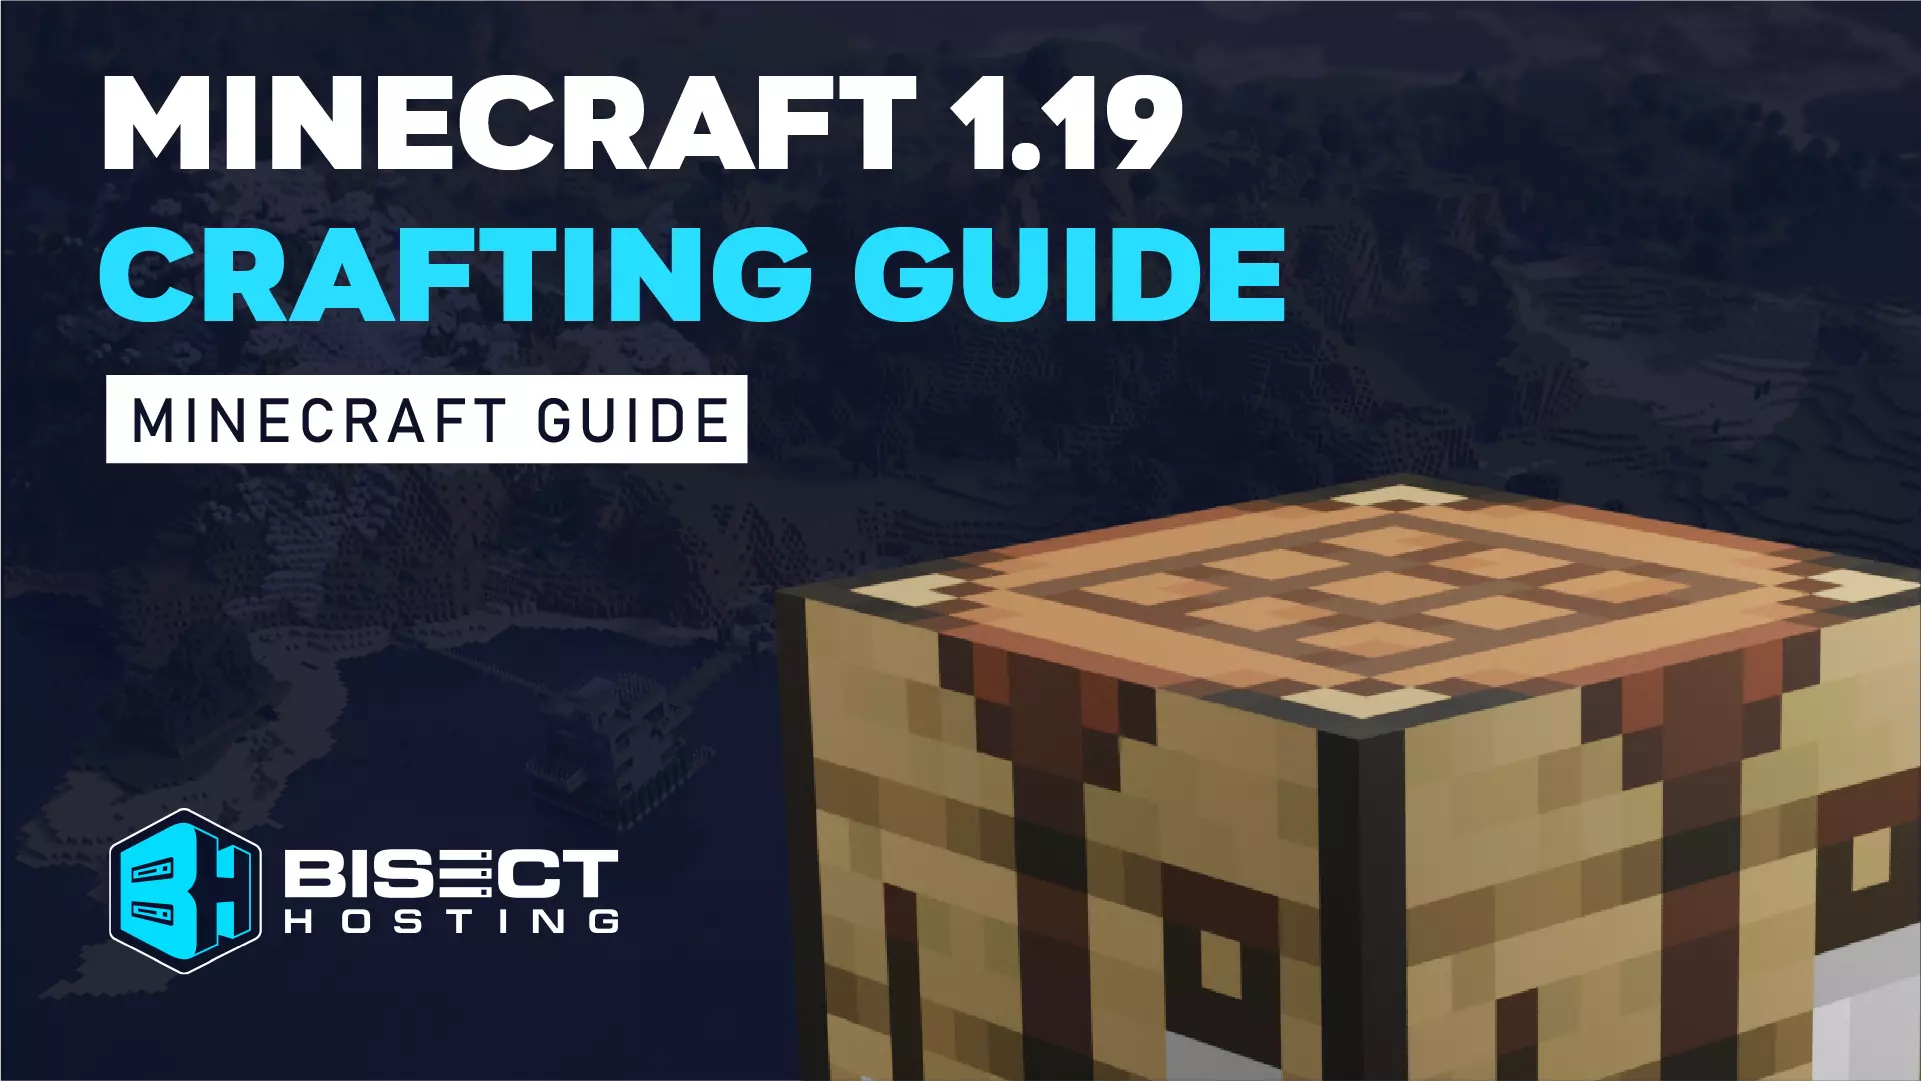 Minecraft 1.19 Crafting Guide